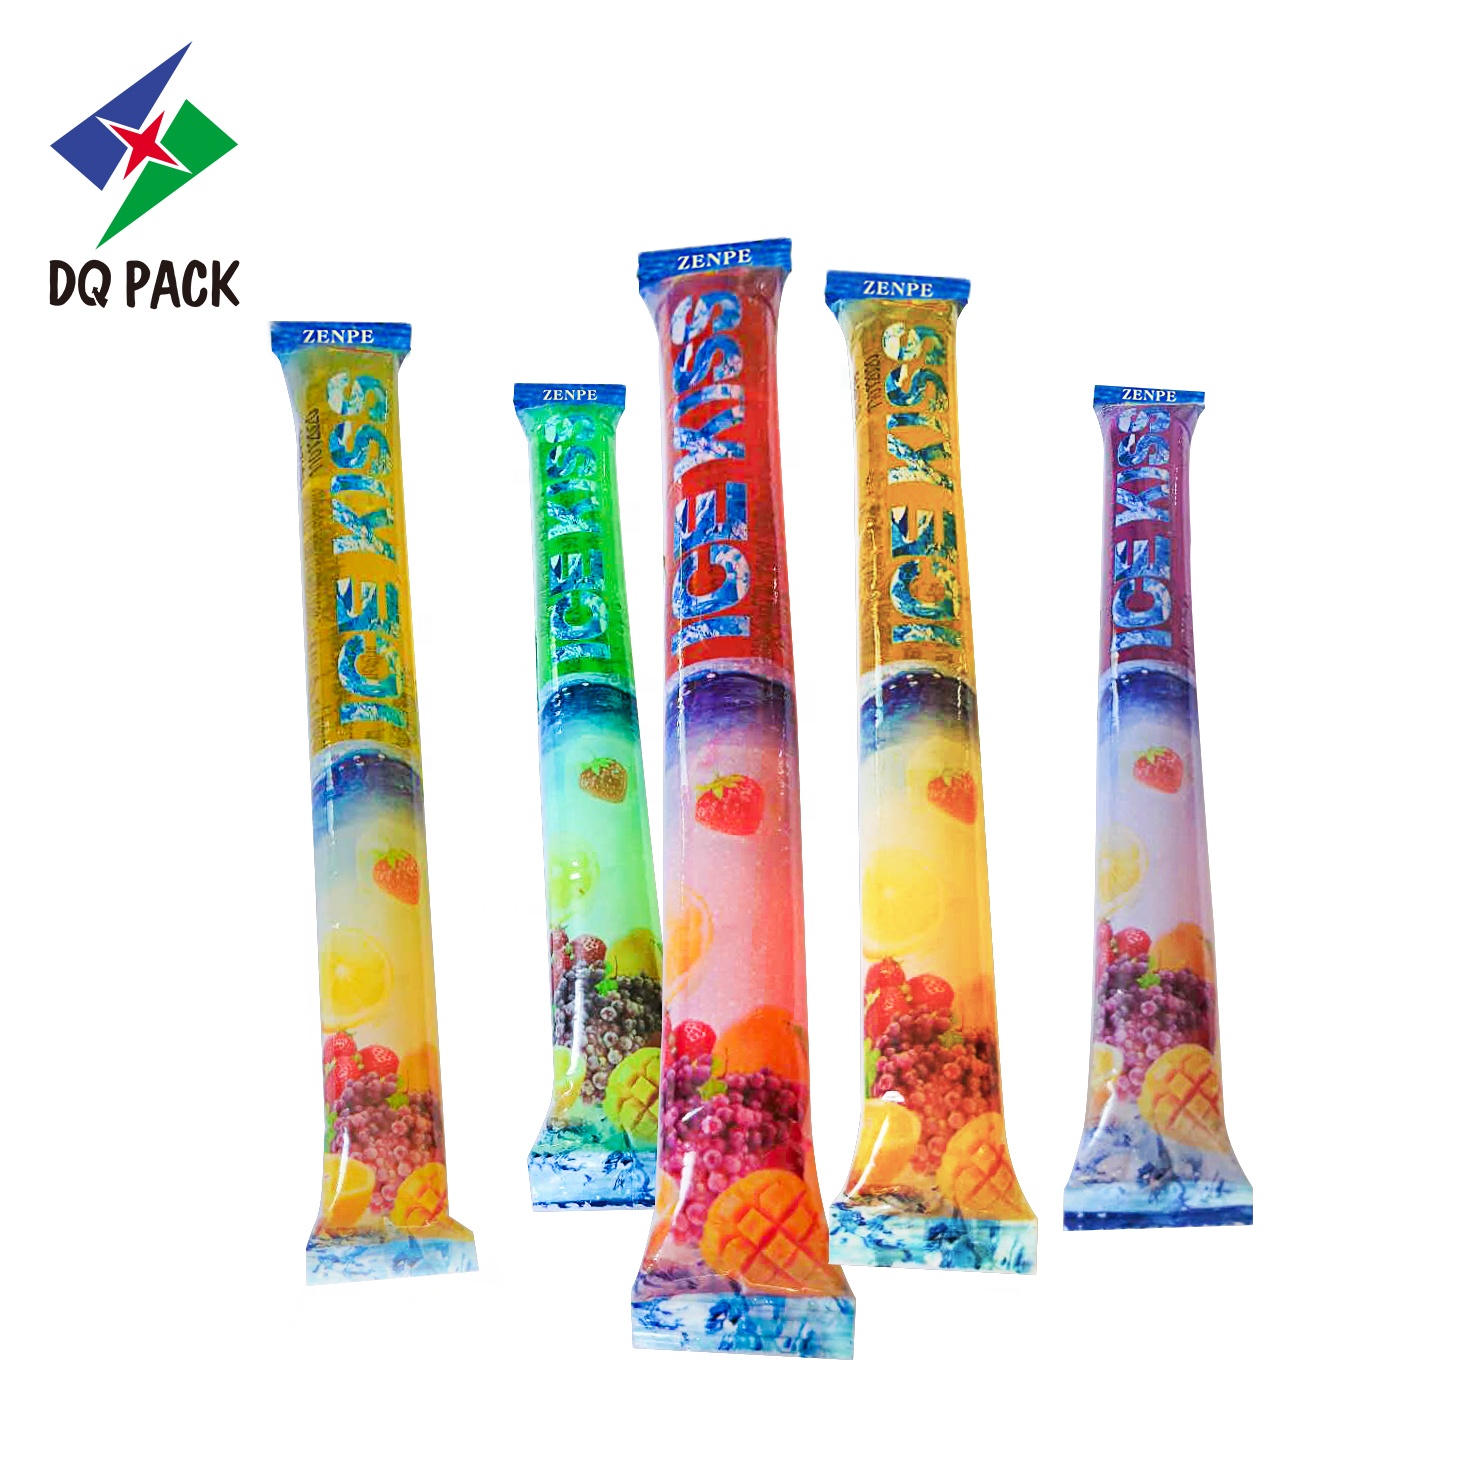 DQ PACK Customized Printed Milk Injection Pouch Juice Plastic Packaging Bag Drinking Fruit Bag For Juice